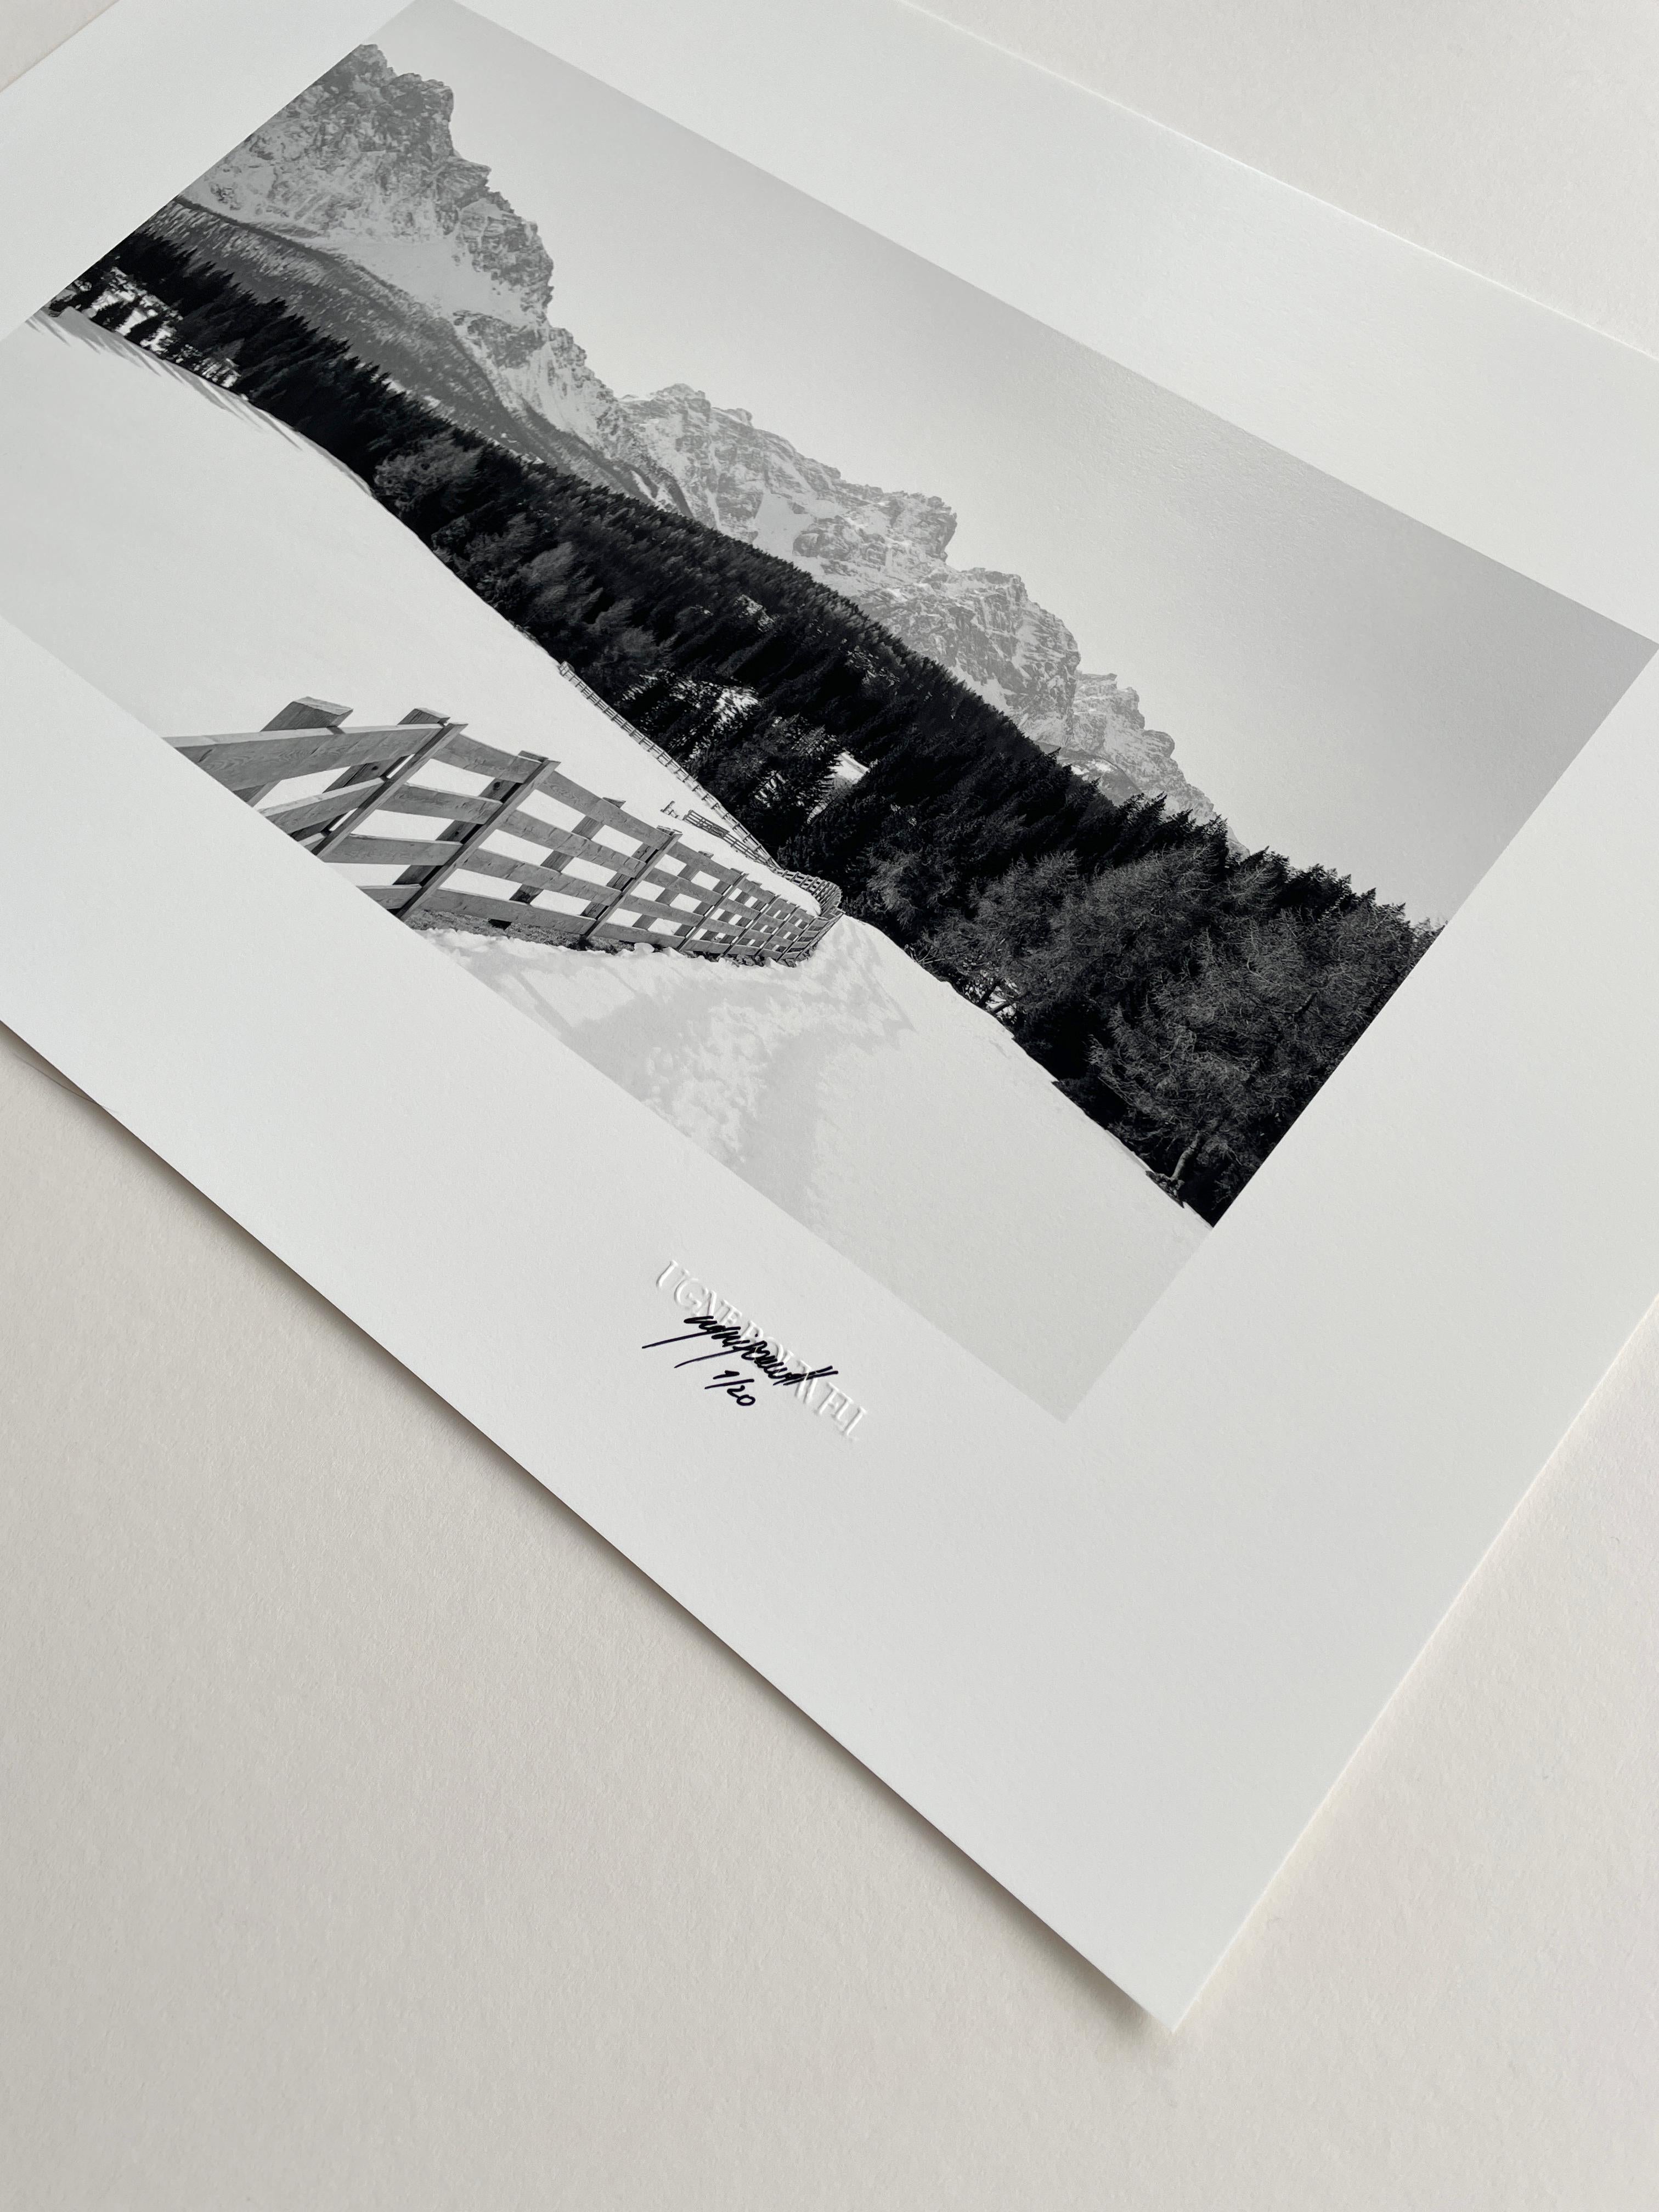 Dolomites No.2, Analogue Black and White Mountain Photography, Ltd. 20 For Sale 1